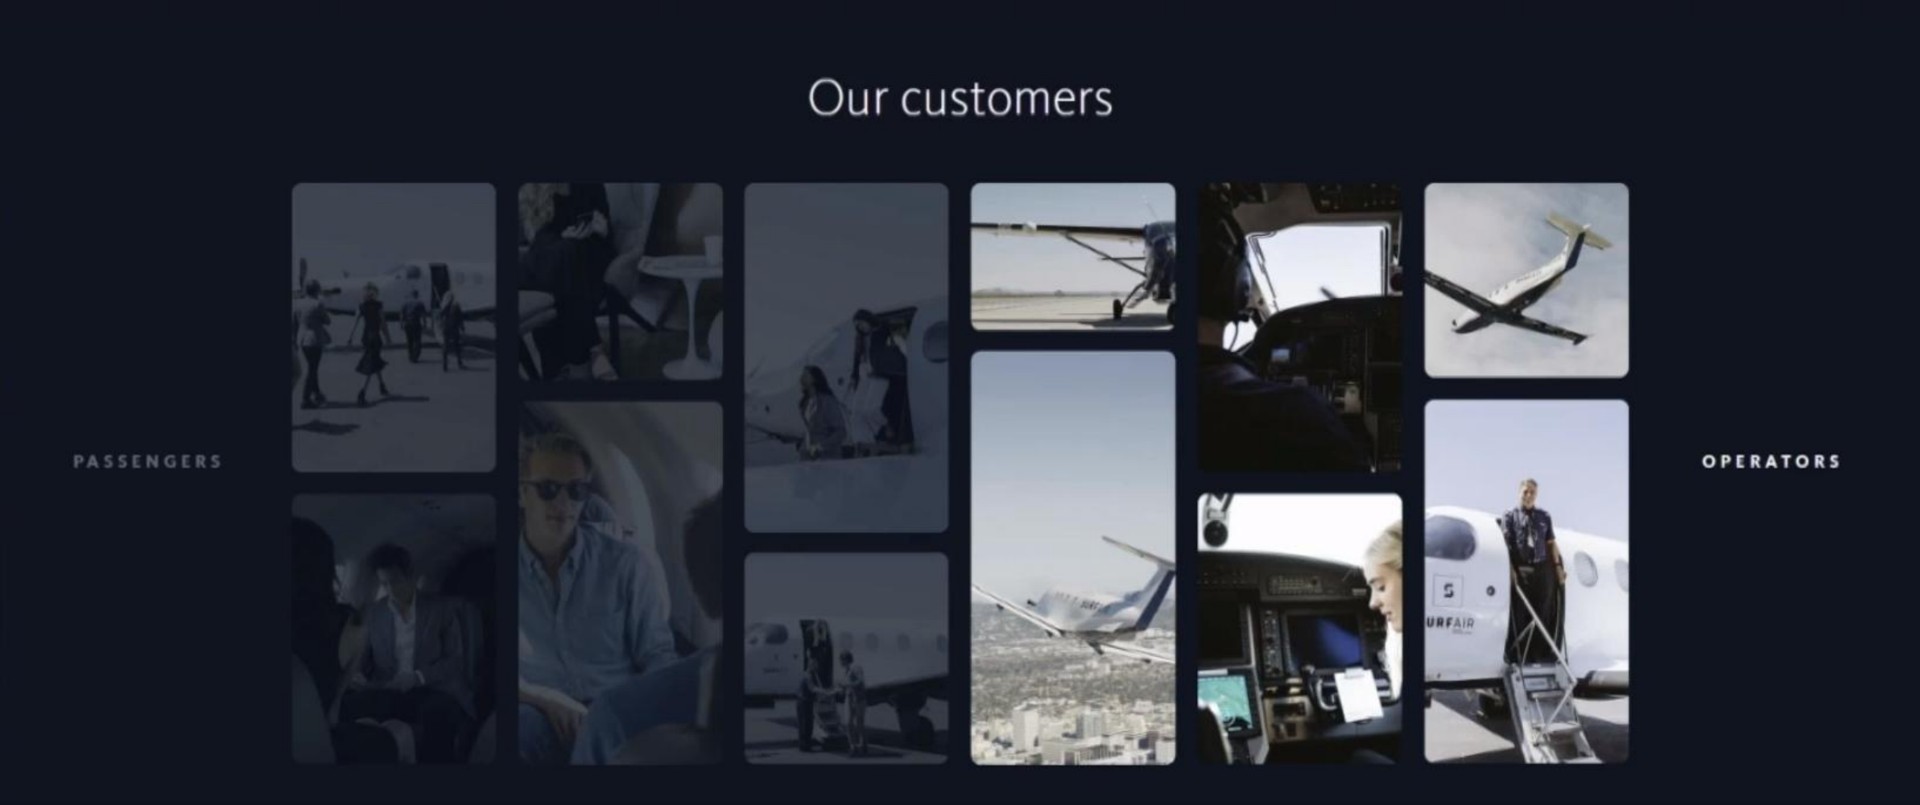 our customers operators | Surf Air